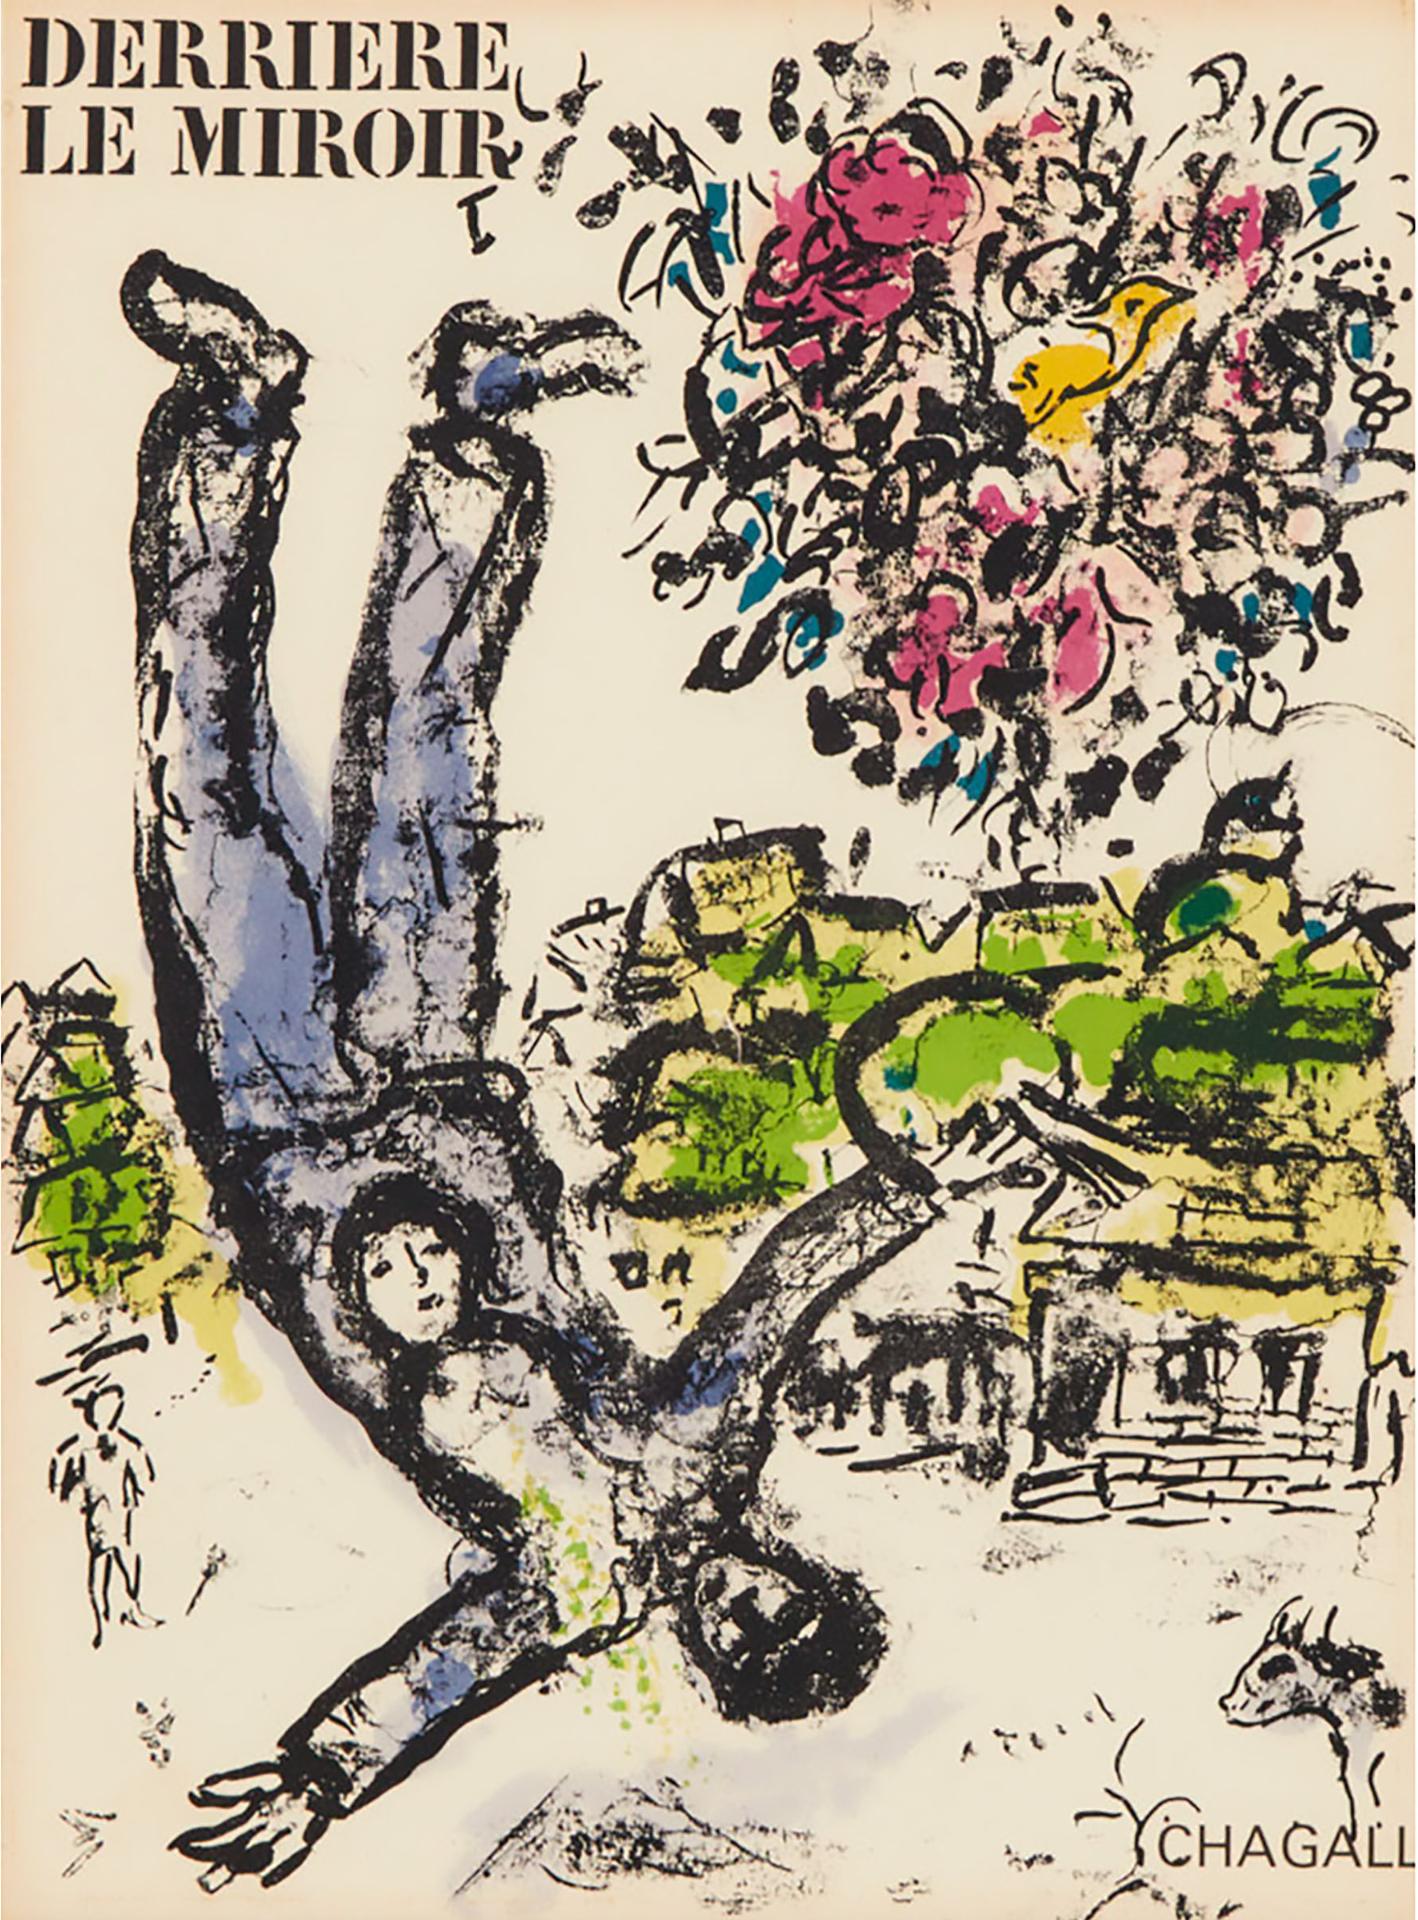 Marc Chagall (1887-1985) - Cover From Derriere Le Miroir N° 147, 1964 [c. Books 59]